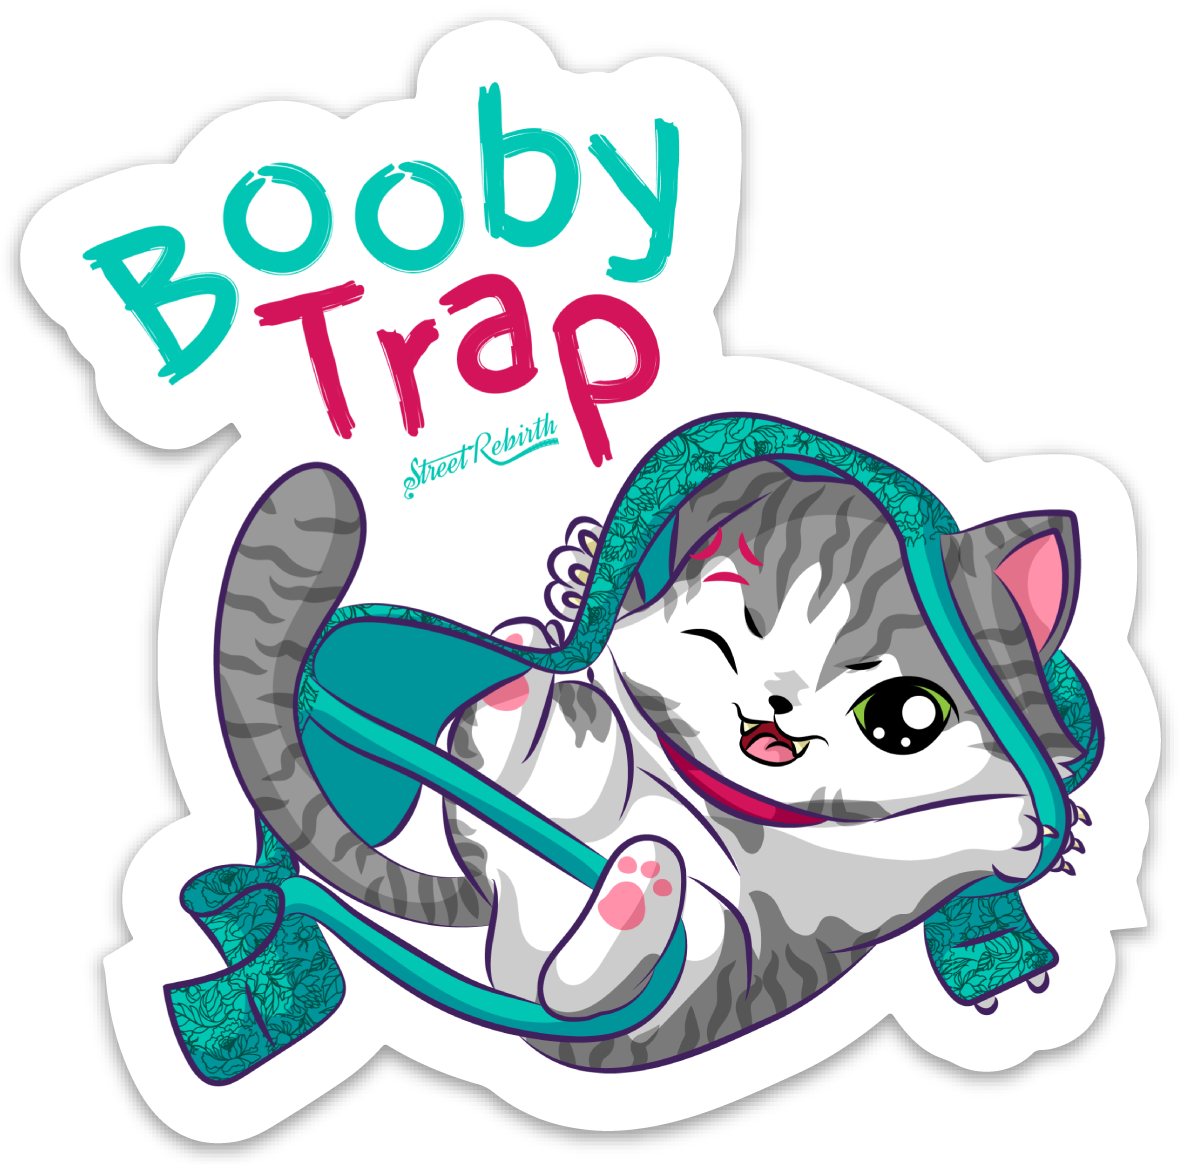 BOOBY TRAP PUN STICKER – ONE 4 INCH WATER PROOF VINYL STICKER – FOR HYDRO FLASK, SKATEBOARD, LAPTOP, PLANNER, CAR, COLLECTING, GIFTING